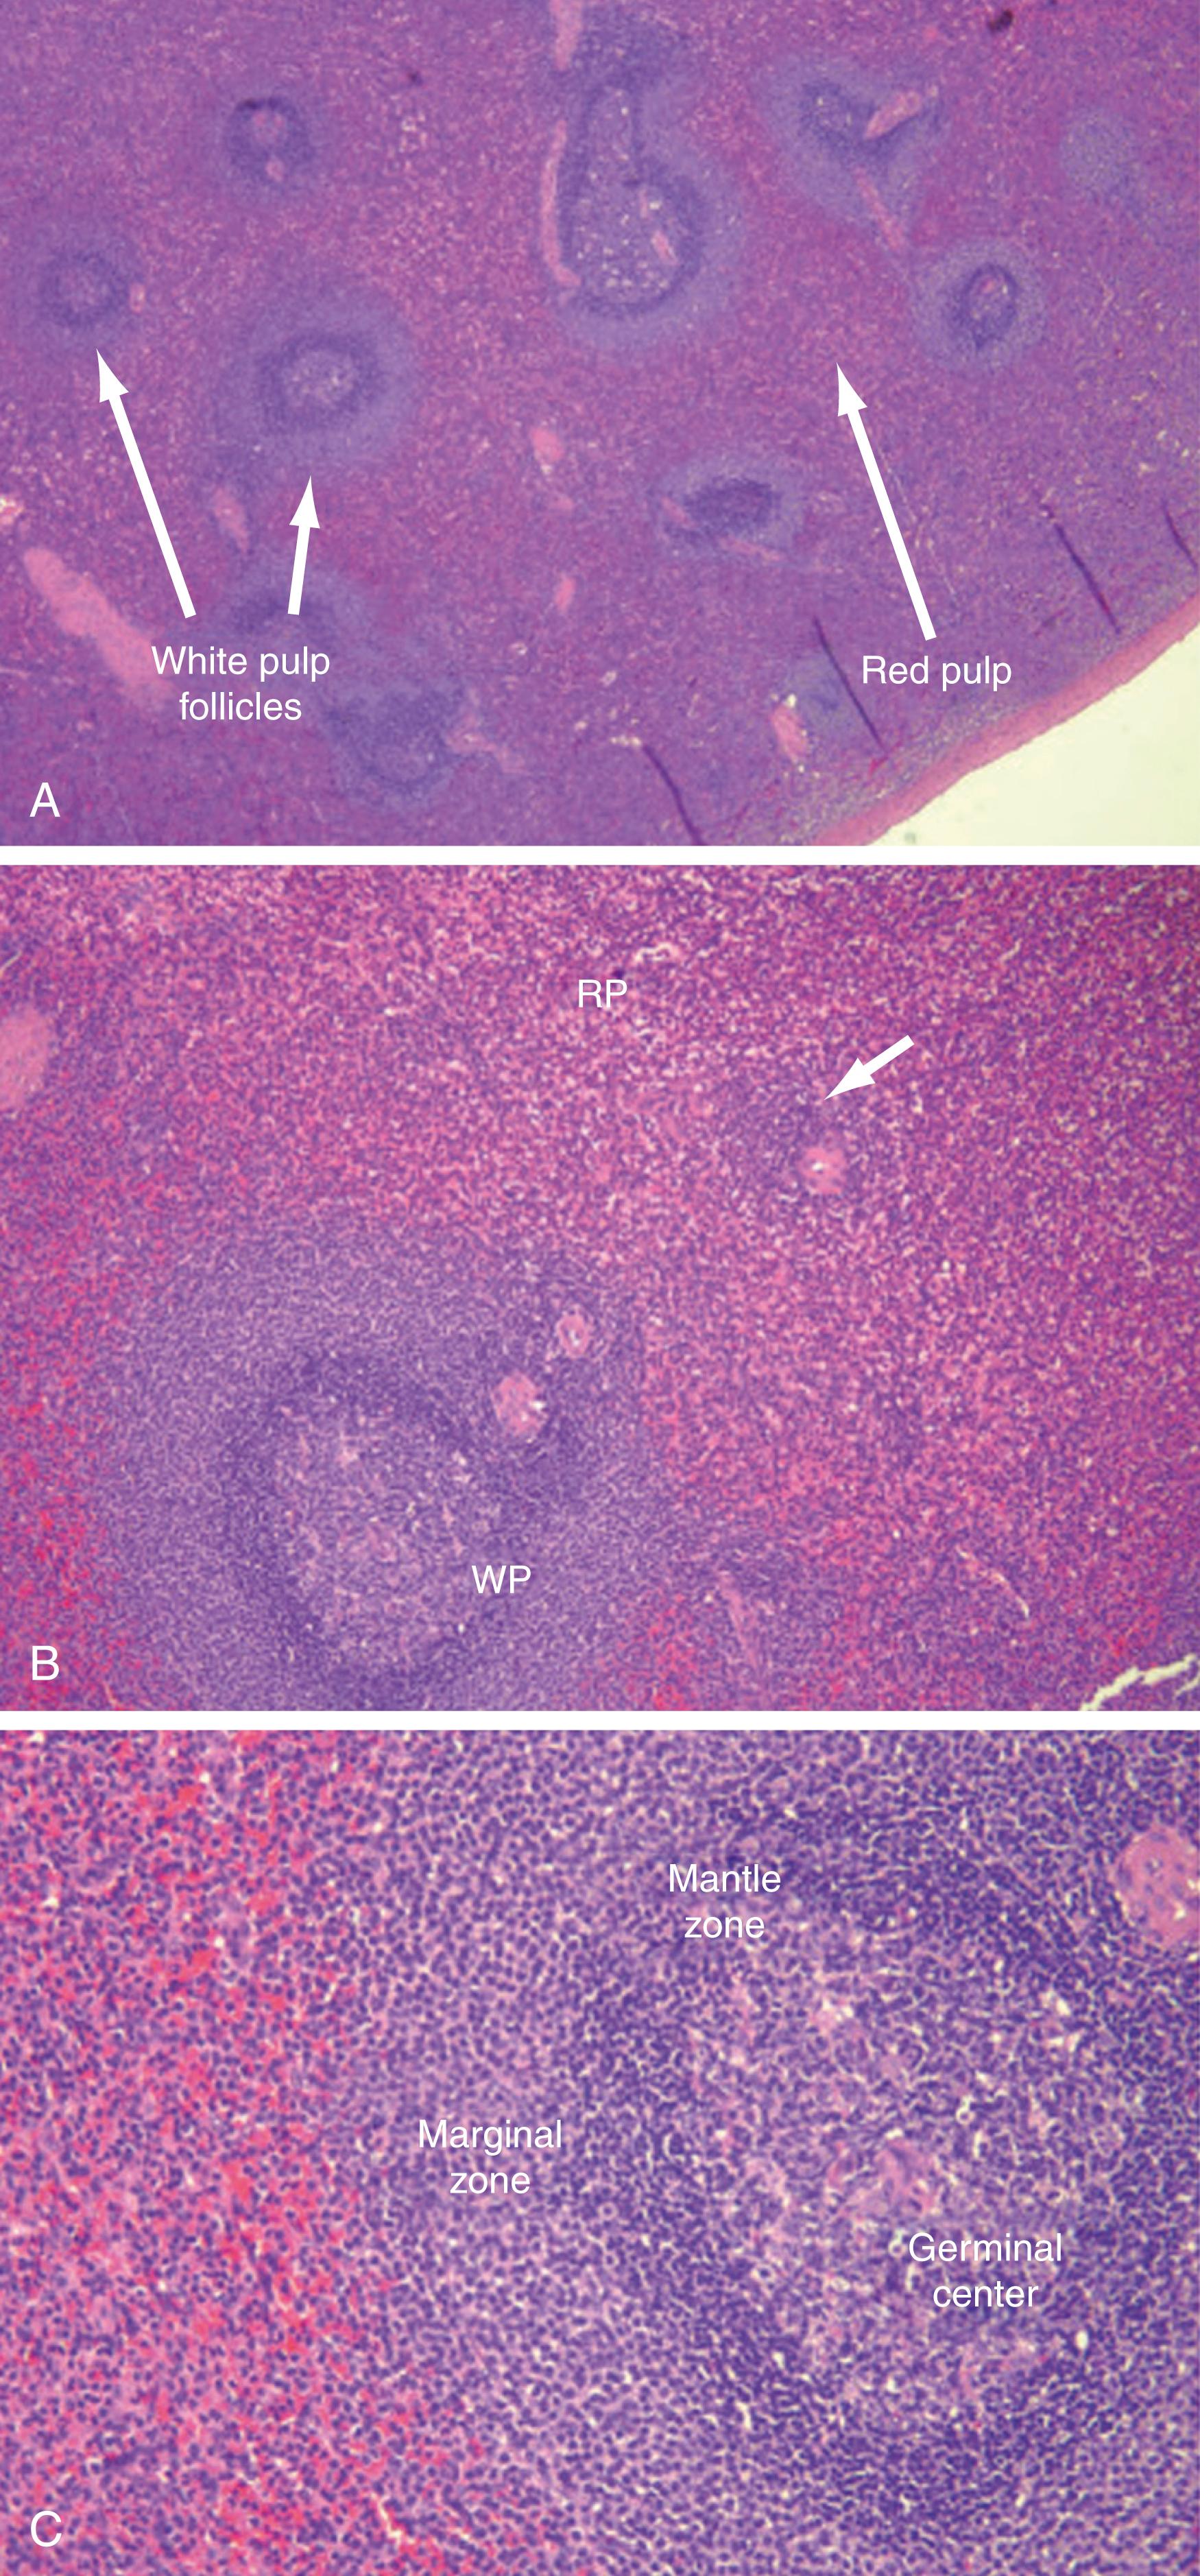 Fig. 57.5, Normal human spleen on hematoxylin-eosin staining. (A) Low-power photomicrograph showing relationship and relative proportions of red and white pulp. (B) Medium-power photomicrograph ( arrow indicates periarterial lymphoid sheath). (C) High-power photomicrograph showing detailed secondary follicle architecture. (From Pernar LIM, Tavakkoli A. Anatomy and physiology of the spleen. In: Yeo CJ, eds. Shackelford’s surgery of the alimentary tract . 8 th ed. Philadelphia, PA: Elsevier; 2019:1595.). RP, Red pulp; WP, white pulp (secondary follicle).